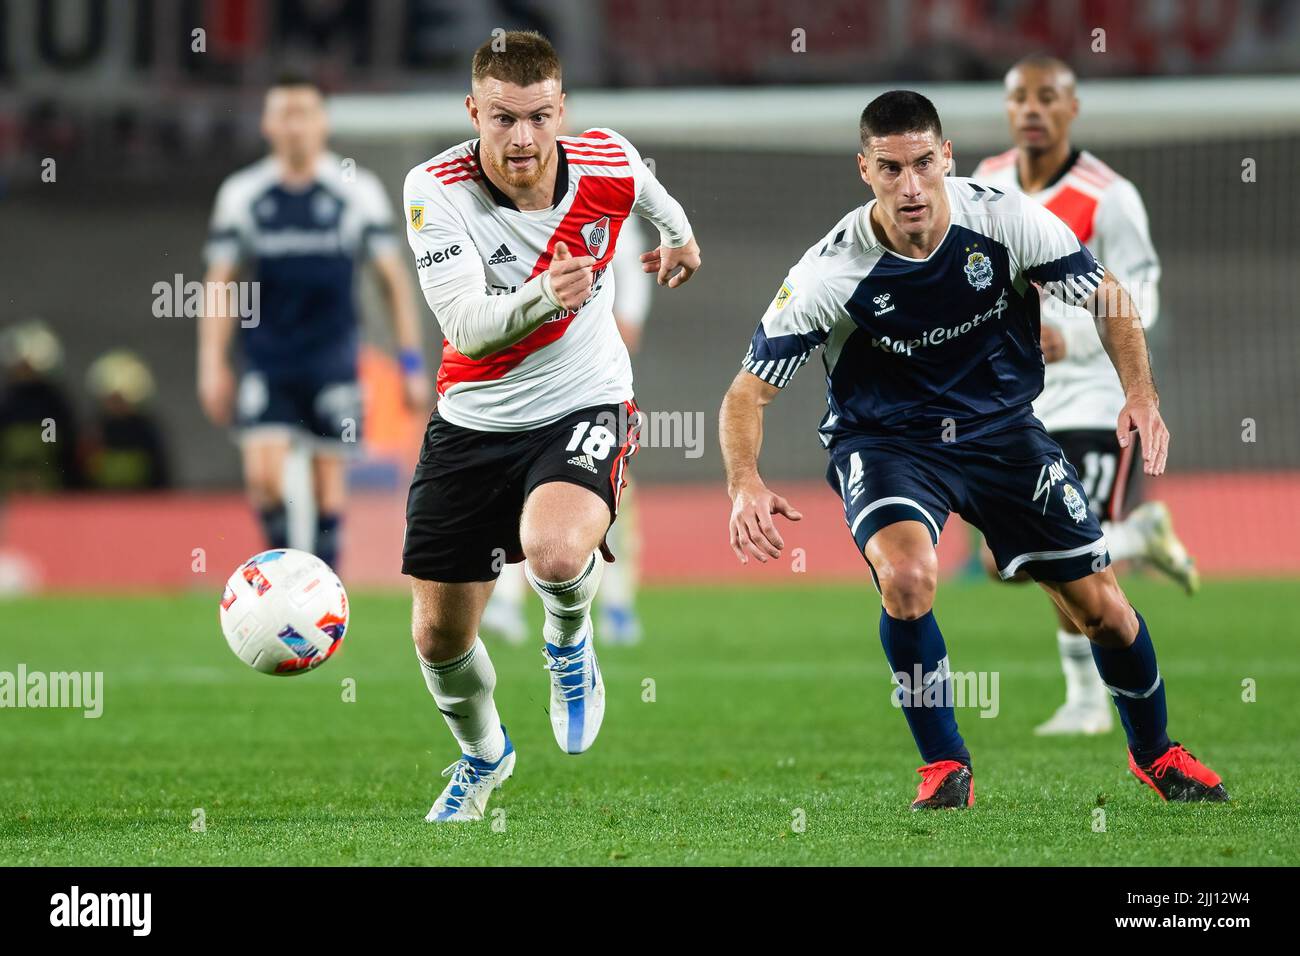 Buenos Aires, Argentina. 21st July, 2022. German Guiffrey (R) of Gimnasia y  Esgrima La Plata and Lucas Beltran (L) of River Plate seen in action during  a match between River Plate and